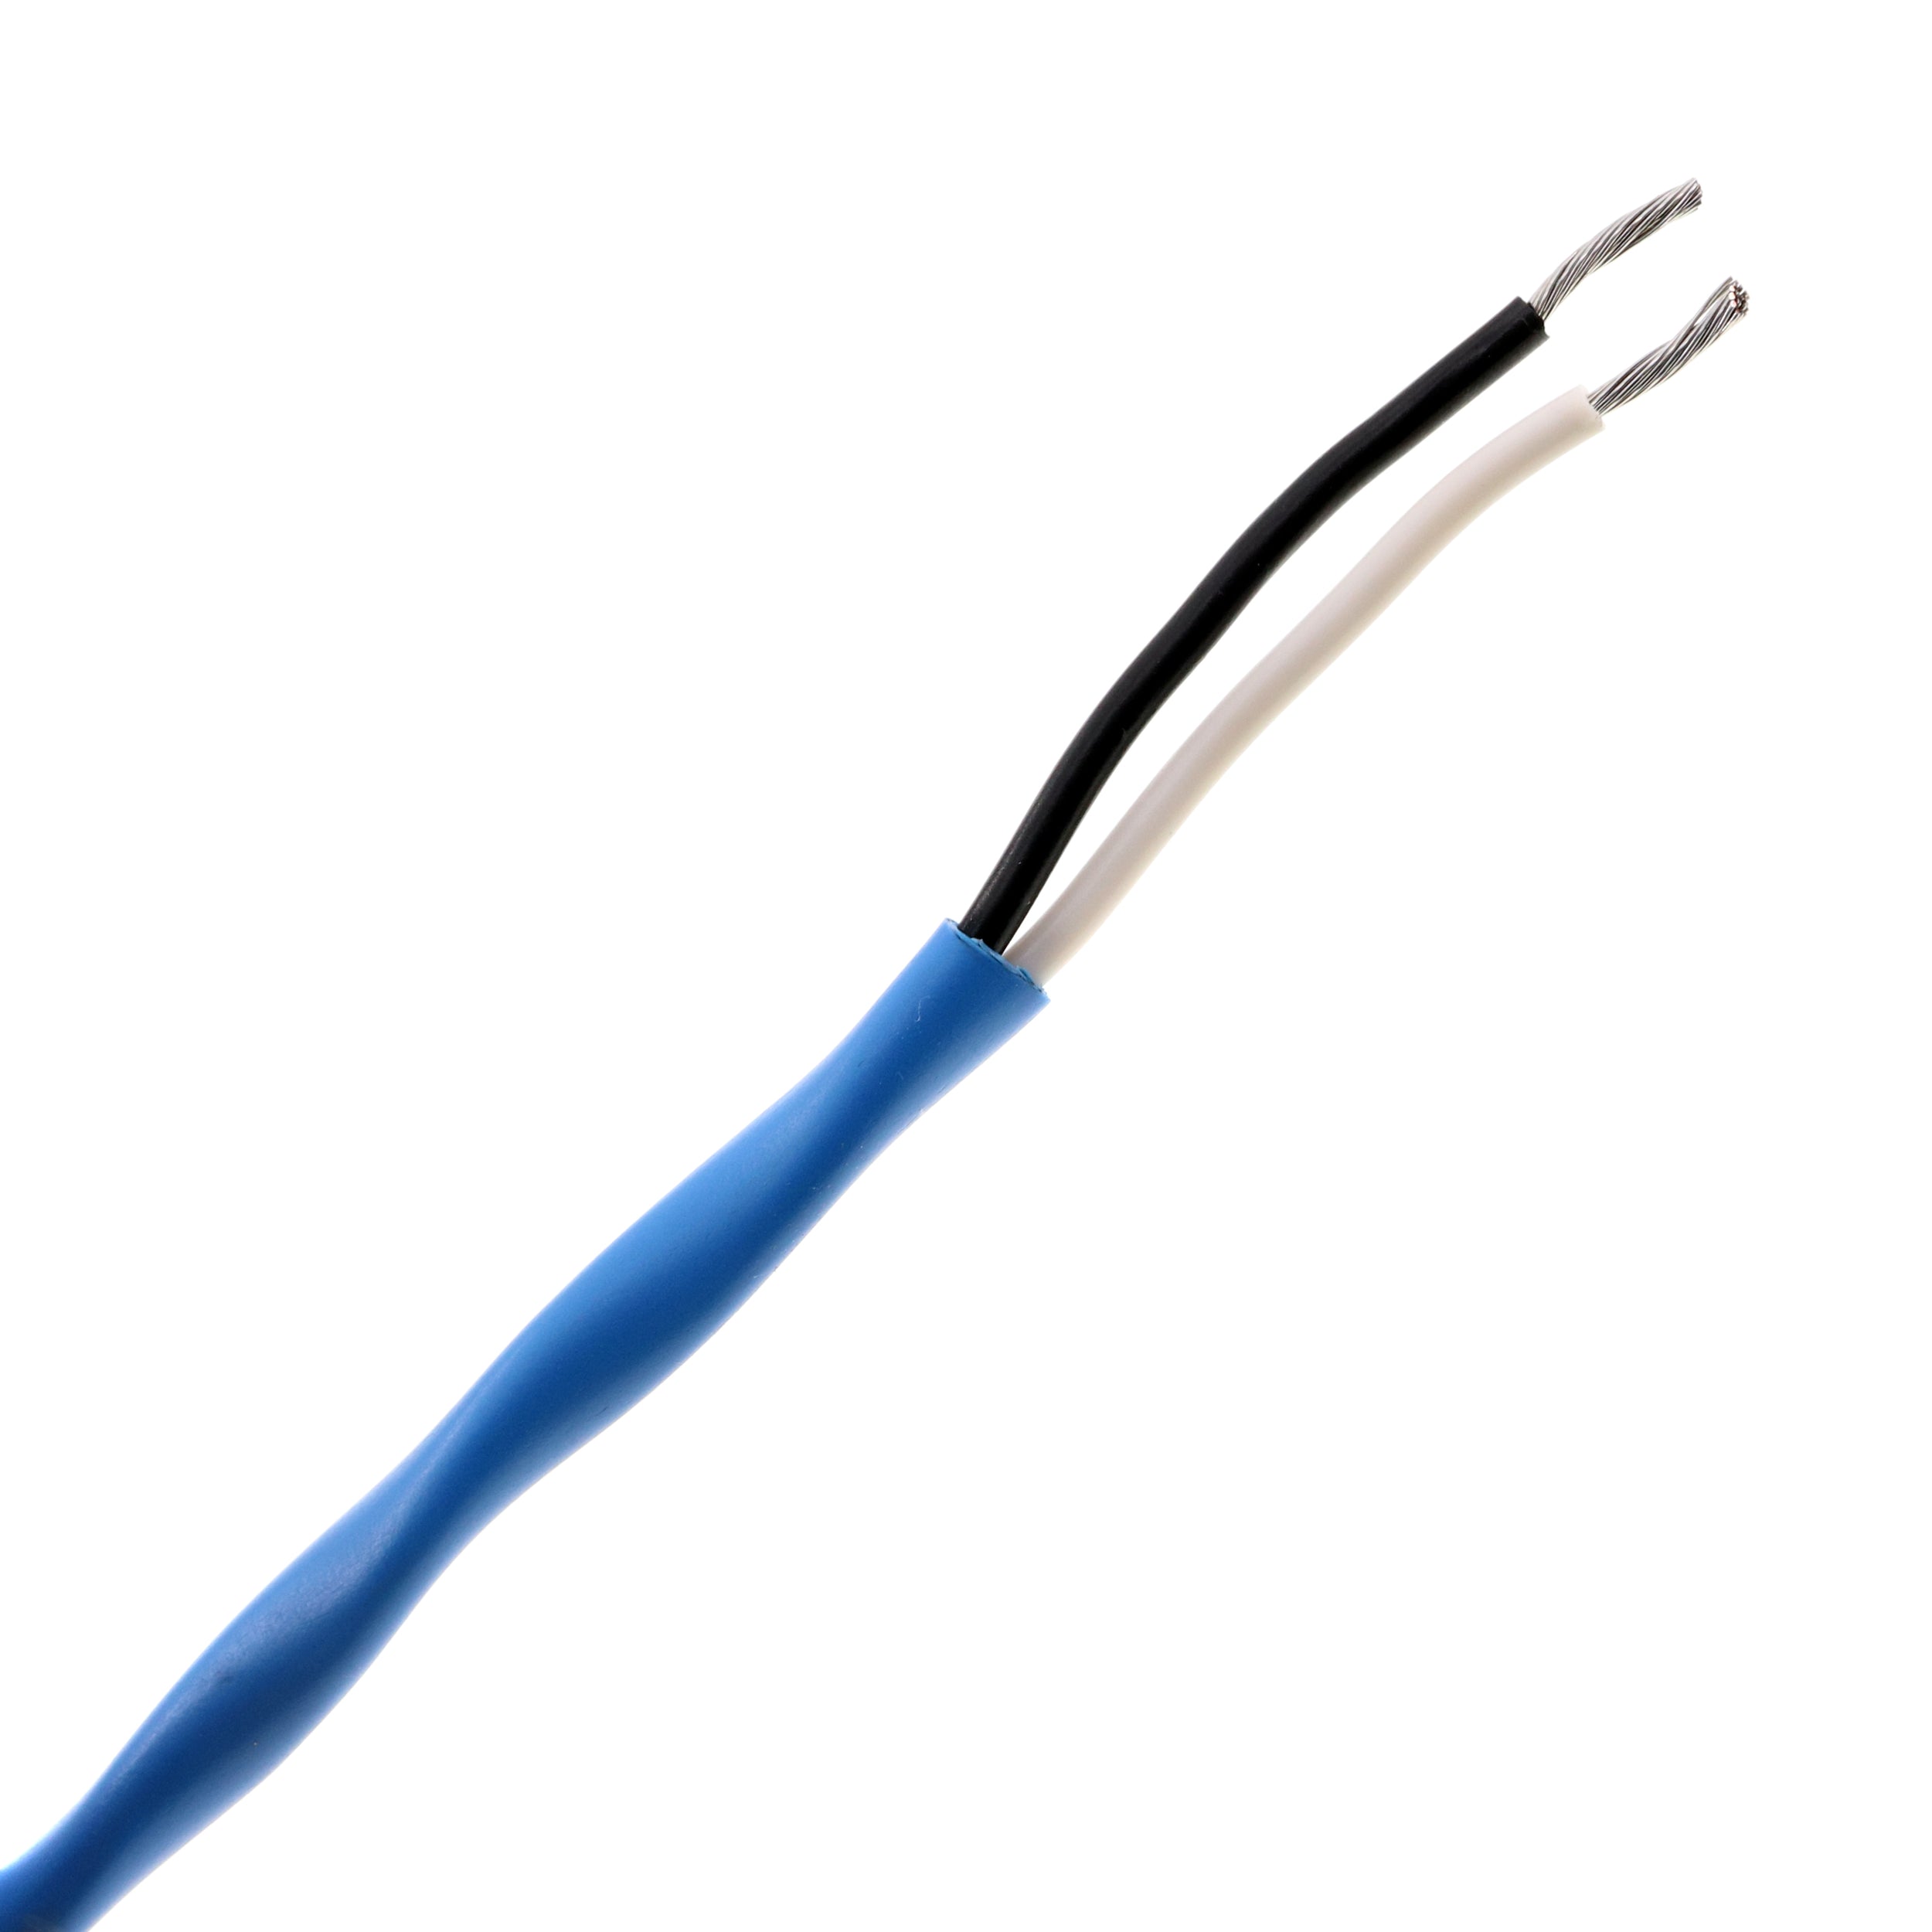 Belden, BEDEN YR62240 AUDIO CABLE, 16AWG, 2-CONDUCTOR, 16/2C, PVC, BLUE, 1000-FEET